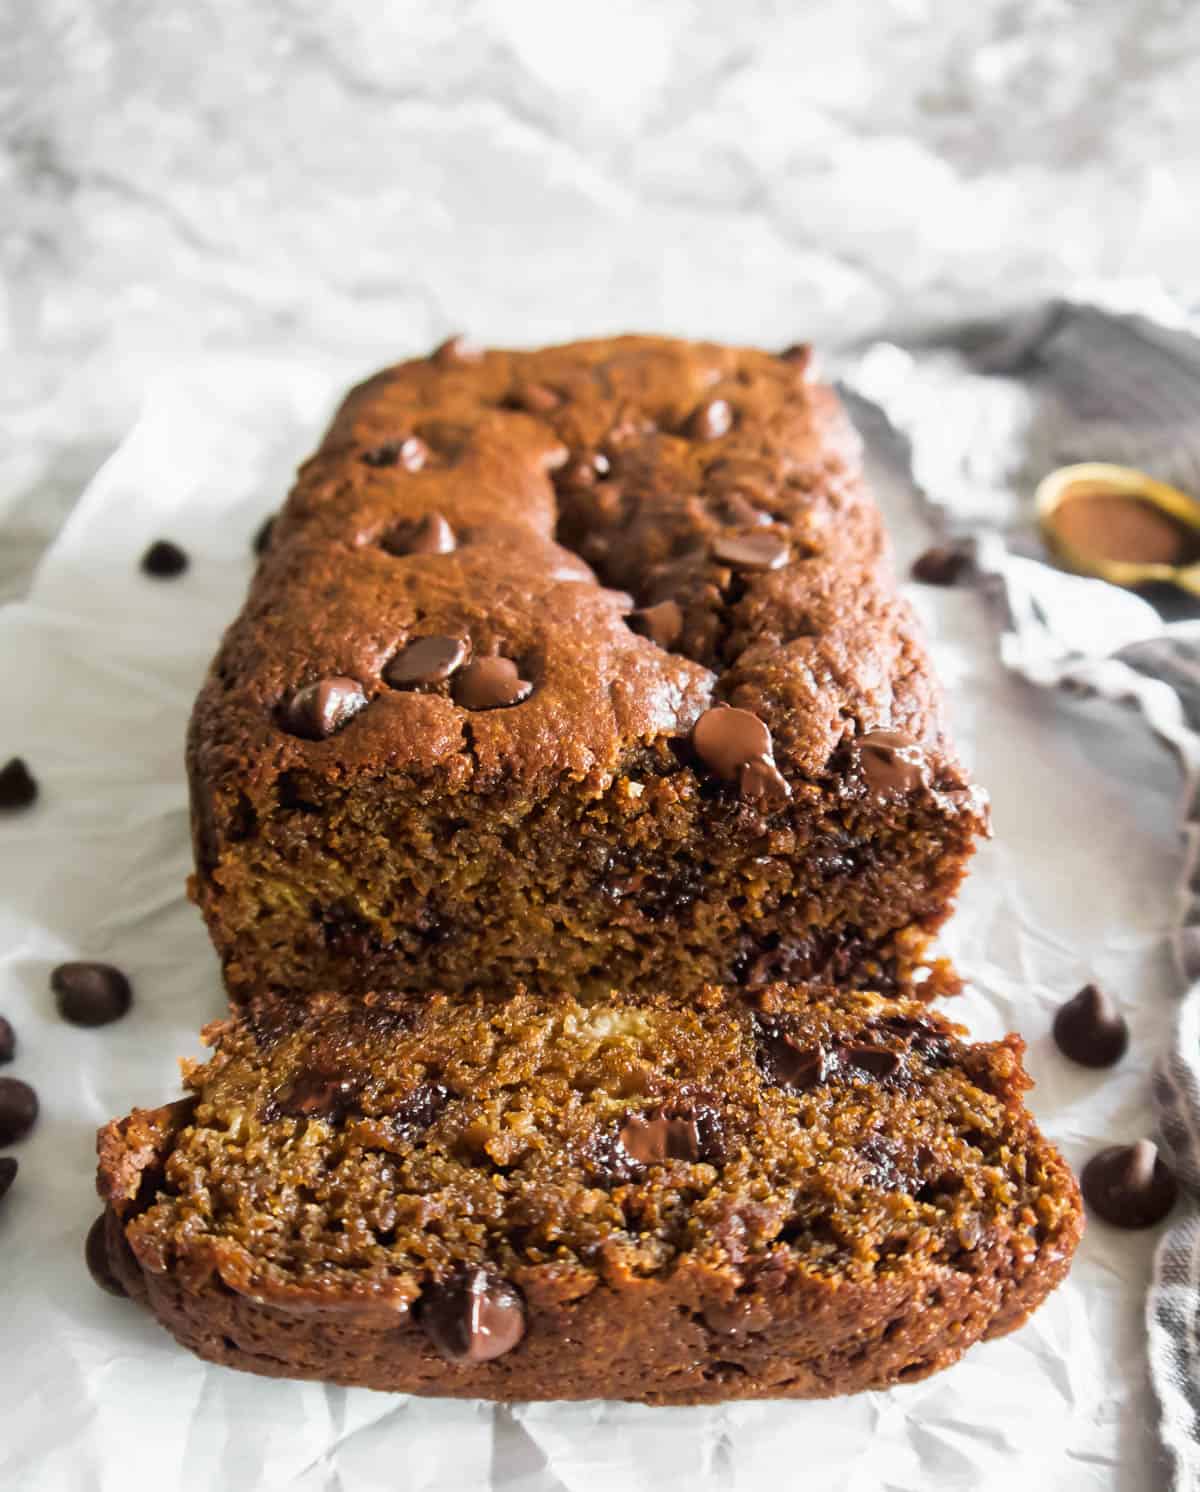 Gluten free dairy free banana bread with espresso and chocolate chips.